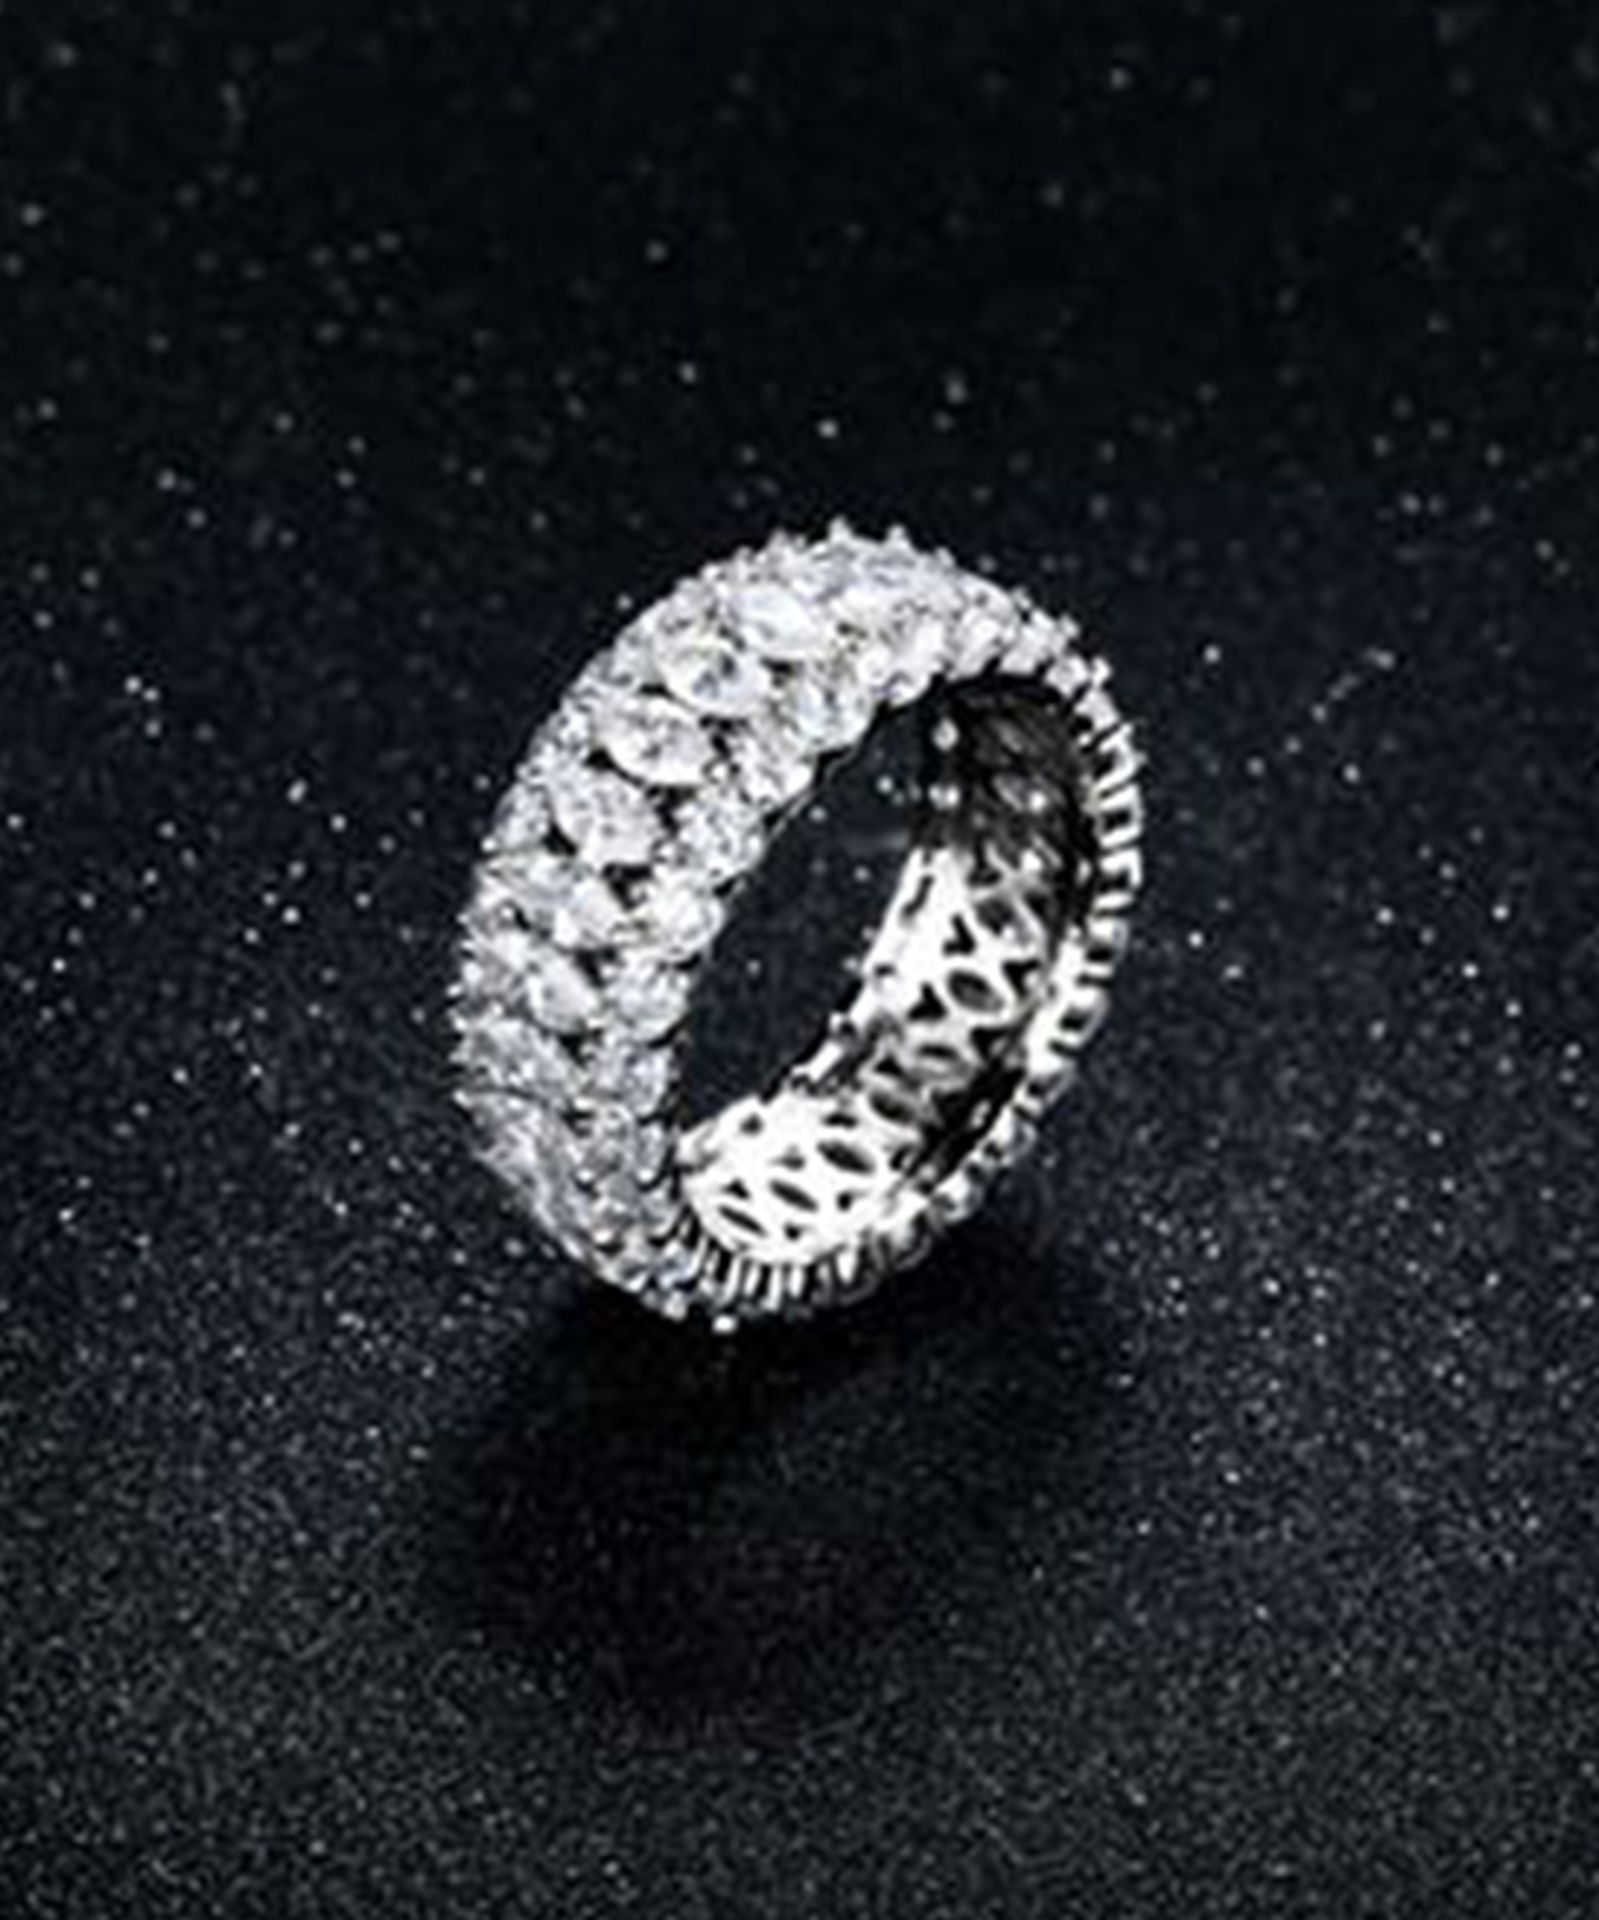 Cubic Zirconia & Sterling Silver Pave Ring (Size: Size 7) [Ref: 53134428-Box 4] - Image 2 of 2